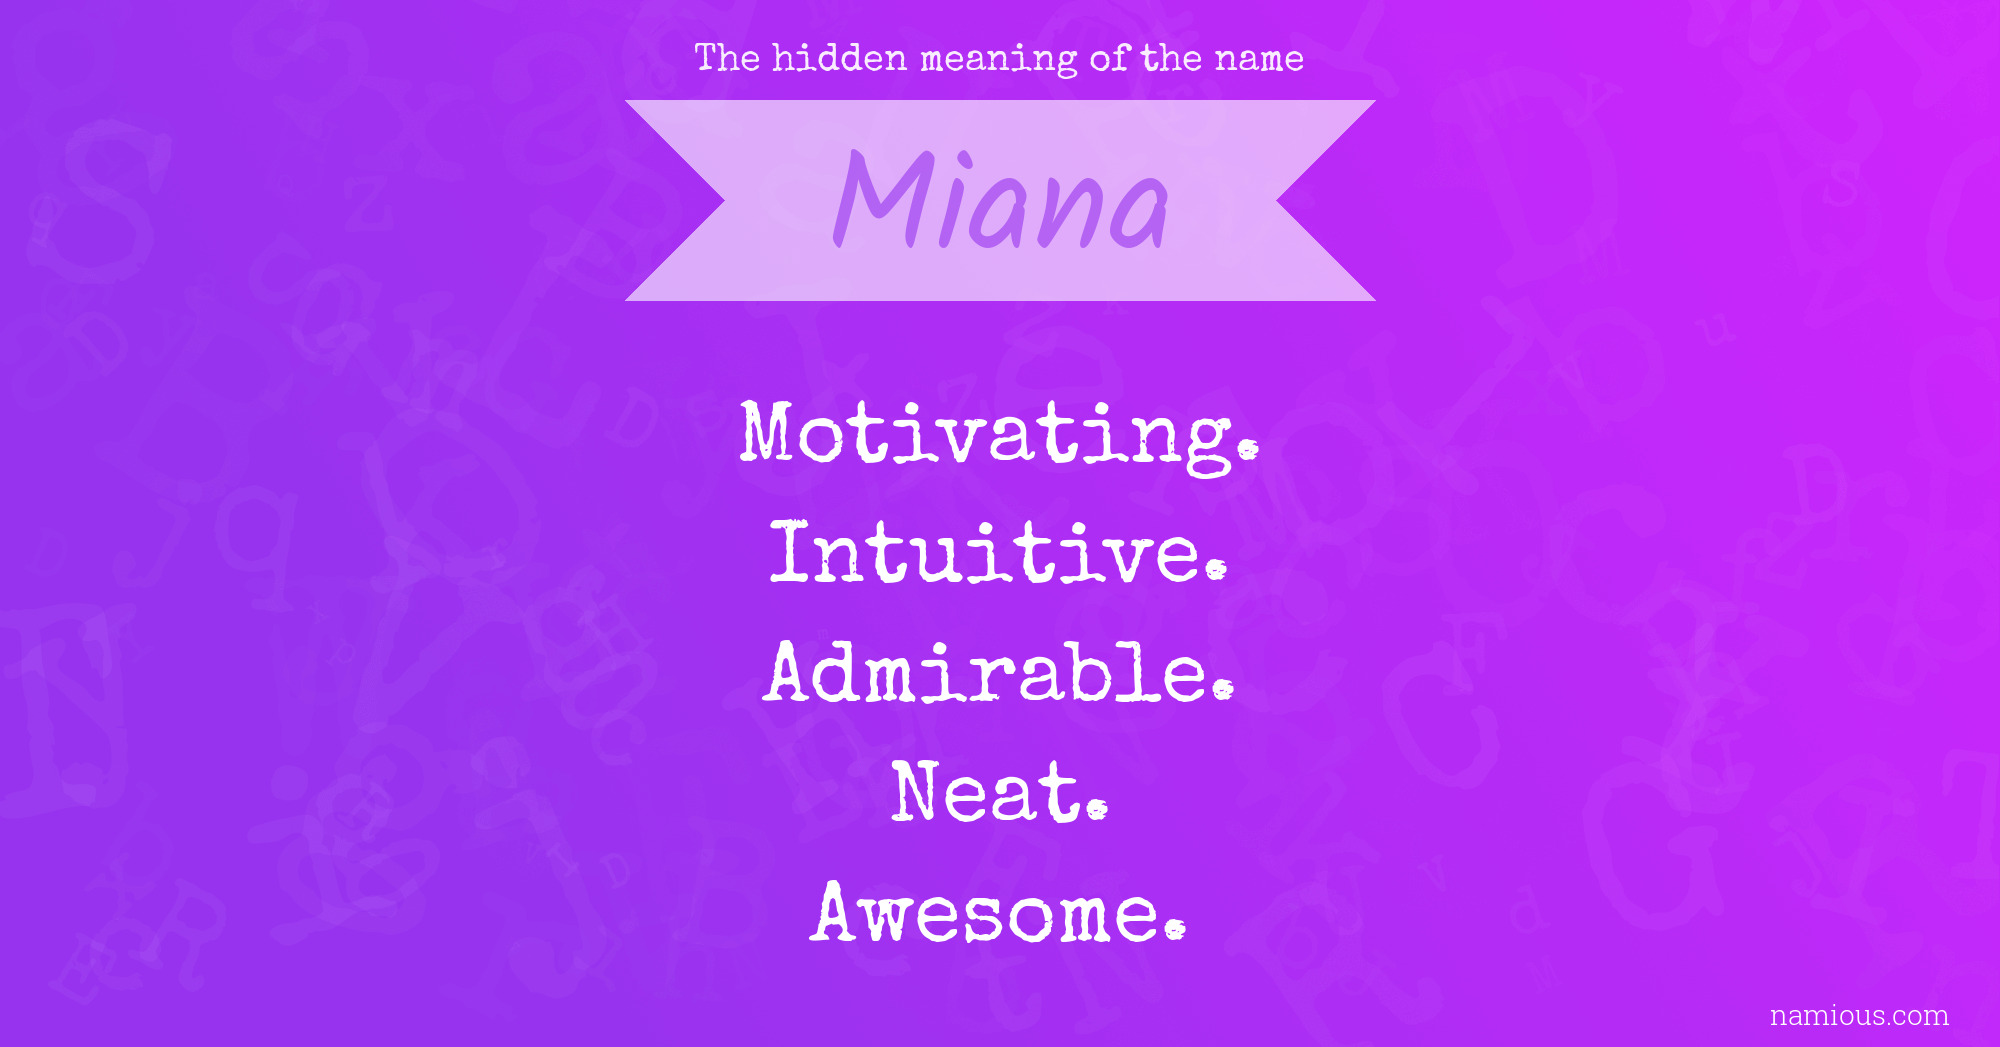 The hidden meaning of the name Miana